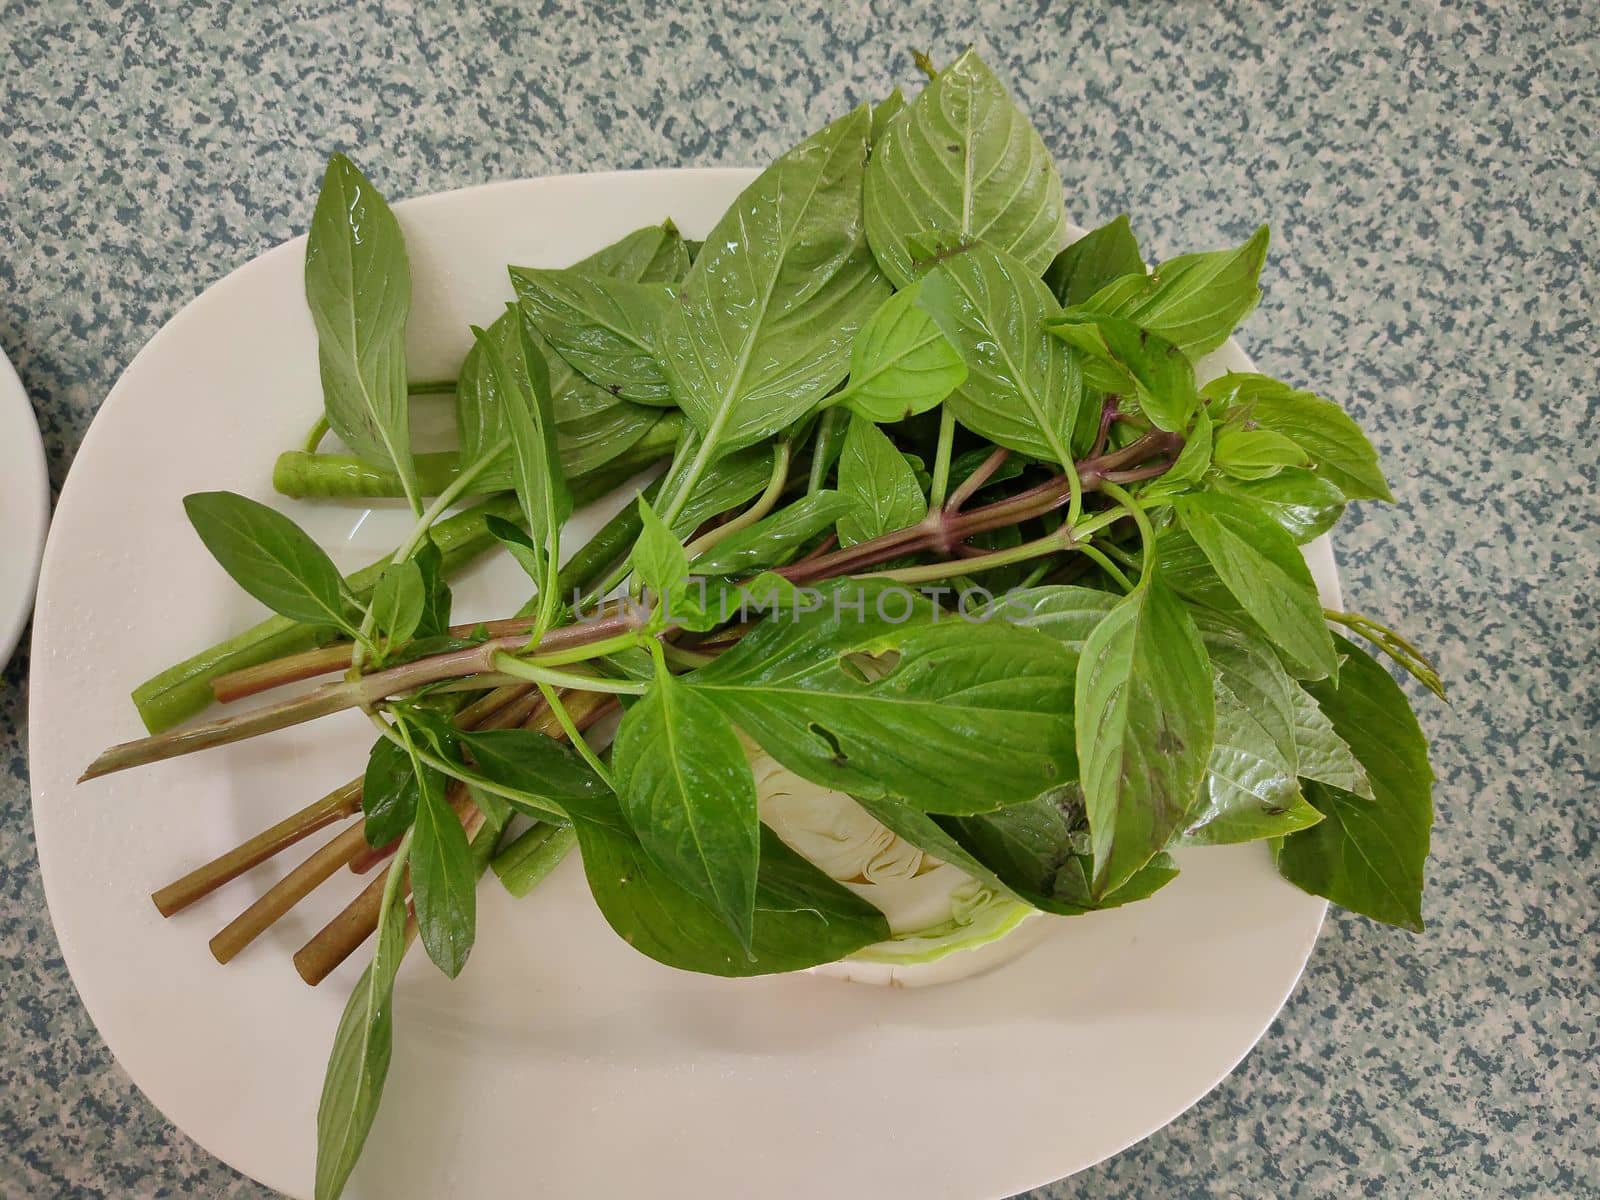 The sweet basil leaves as nice natural food background on disk